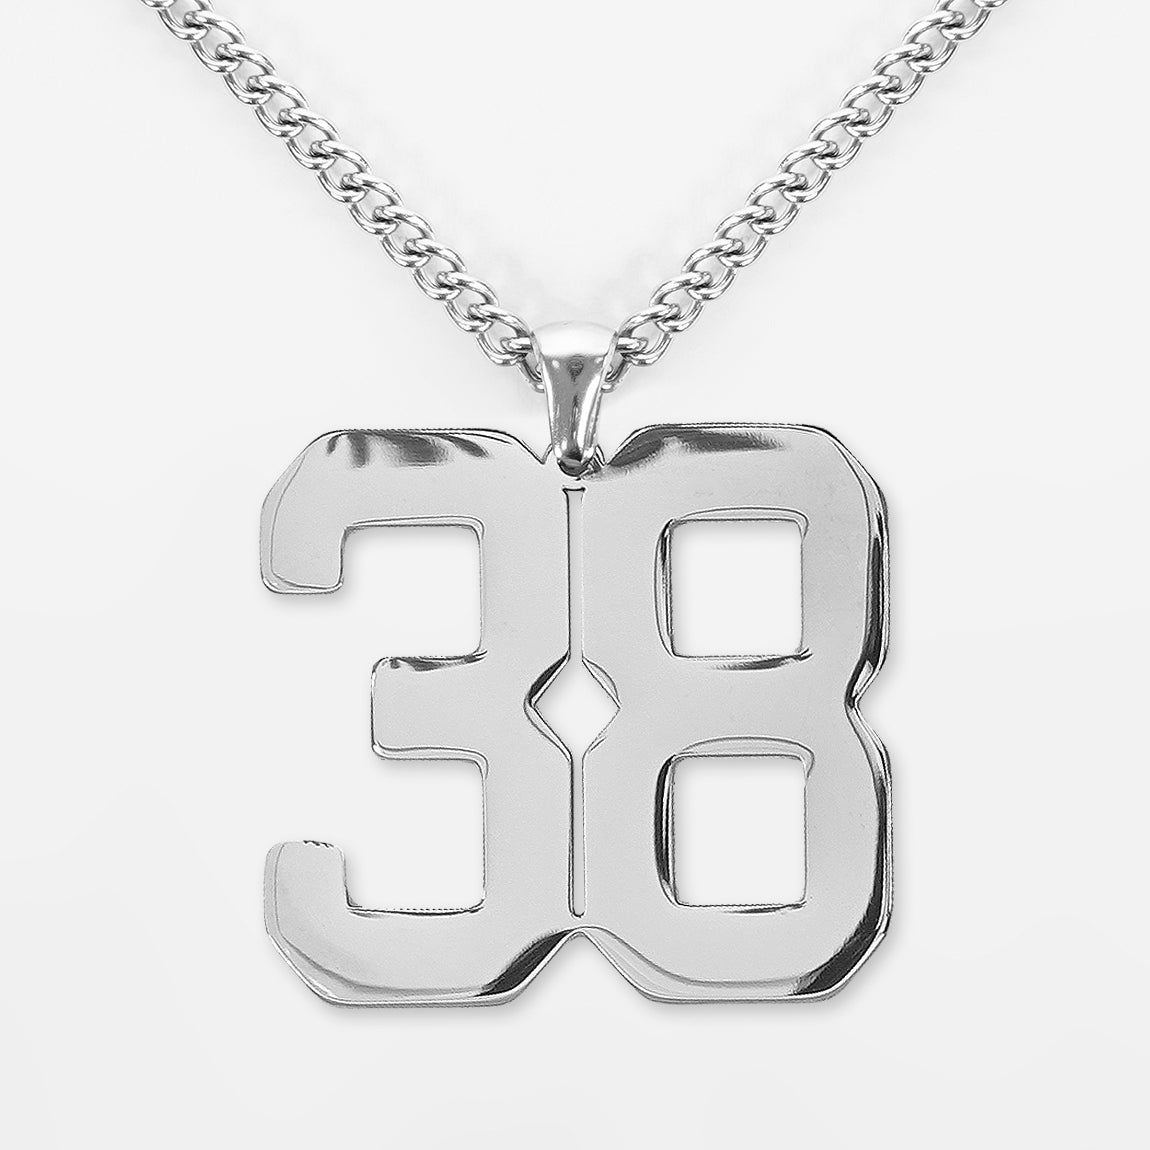 38 Number Pendant with Chain Necklace - Stainless Steel